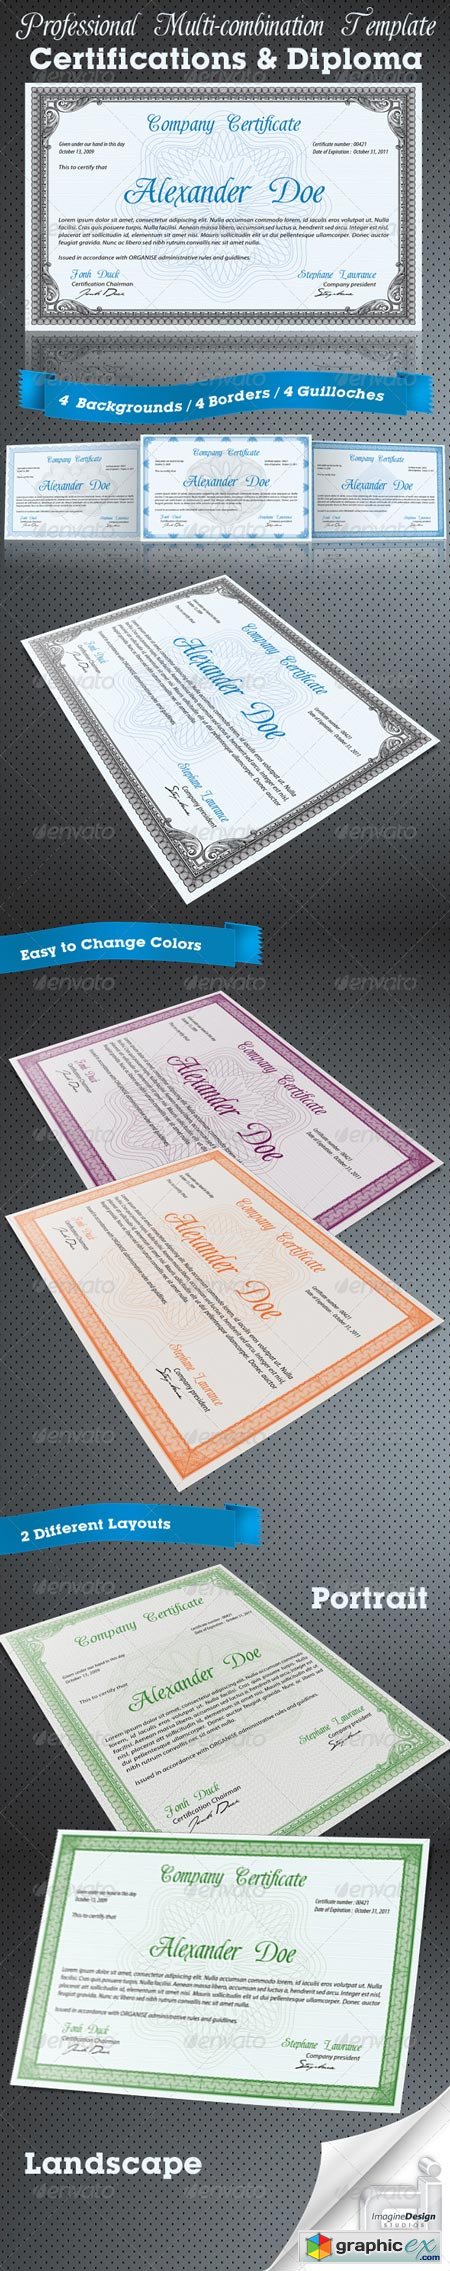 Professional Certificate or Diploma Templates 376224